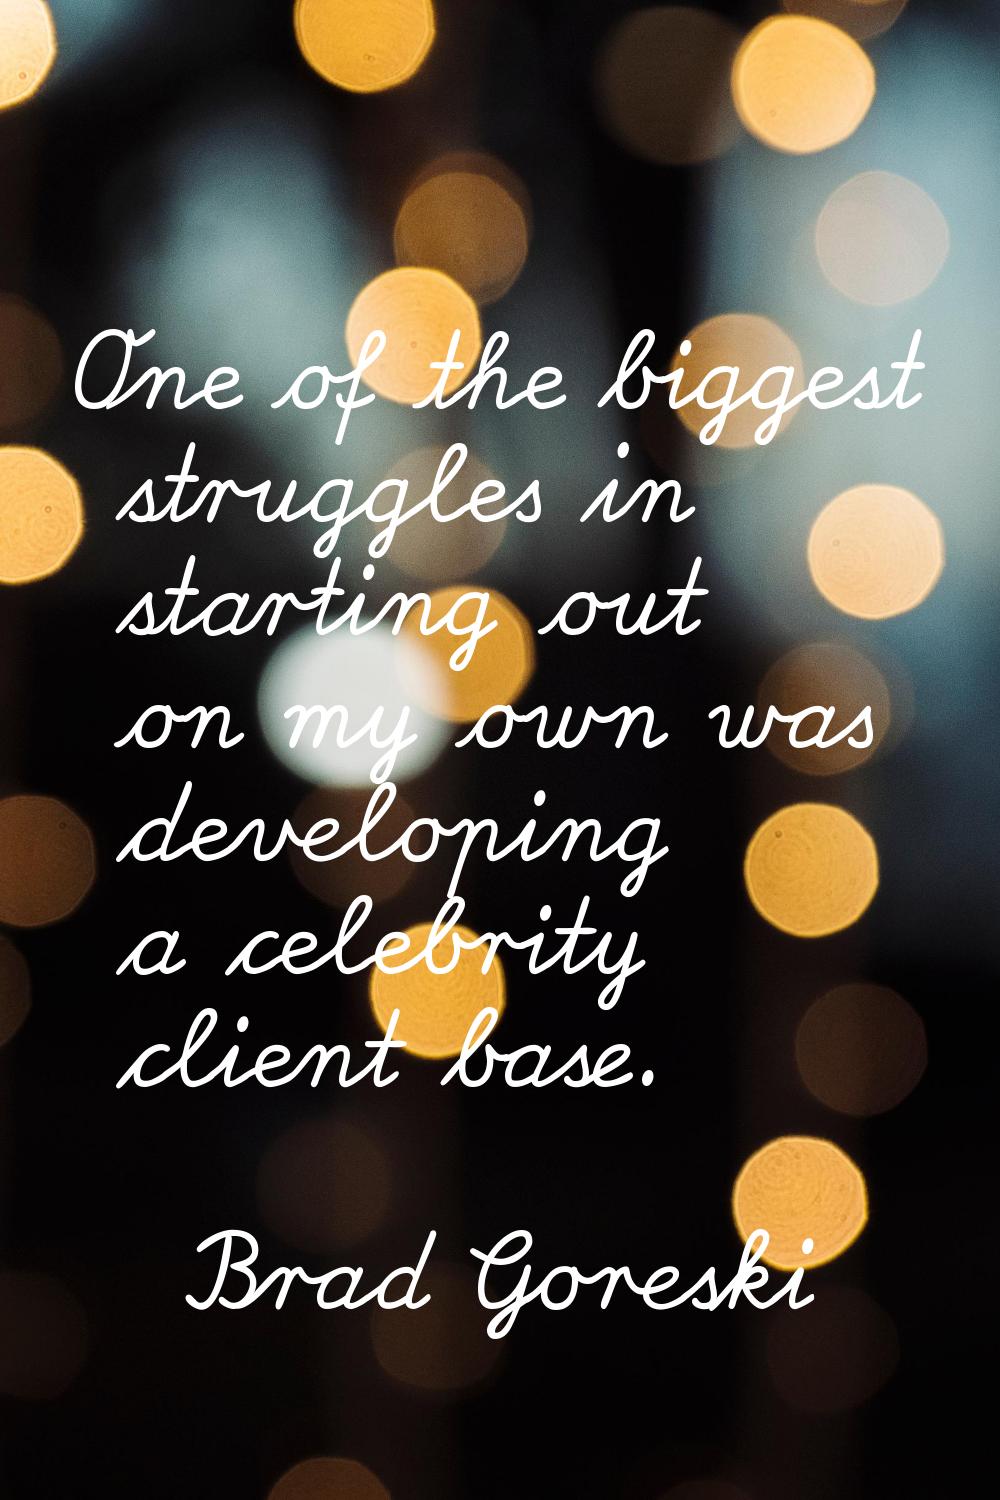 One of the biggest struggles in starting out on my own was developing a celebrity client base.